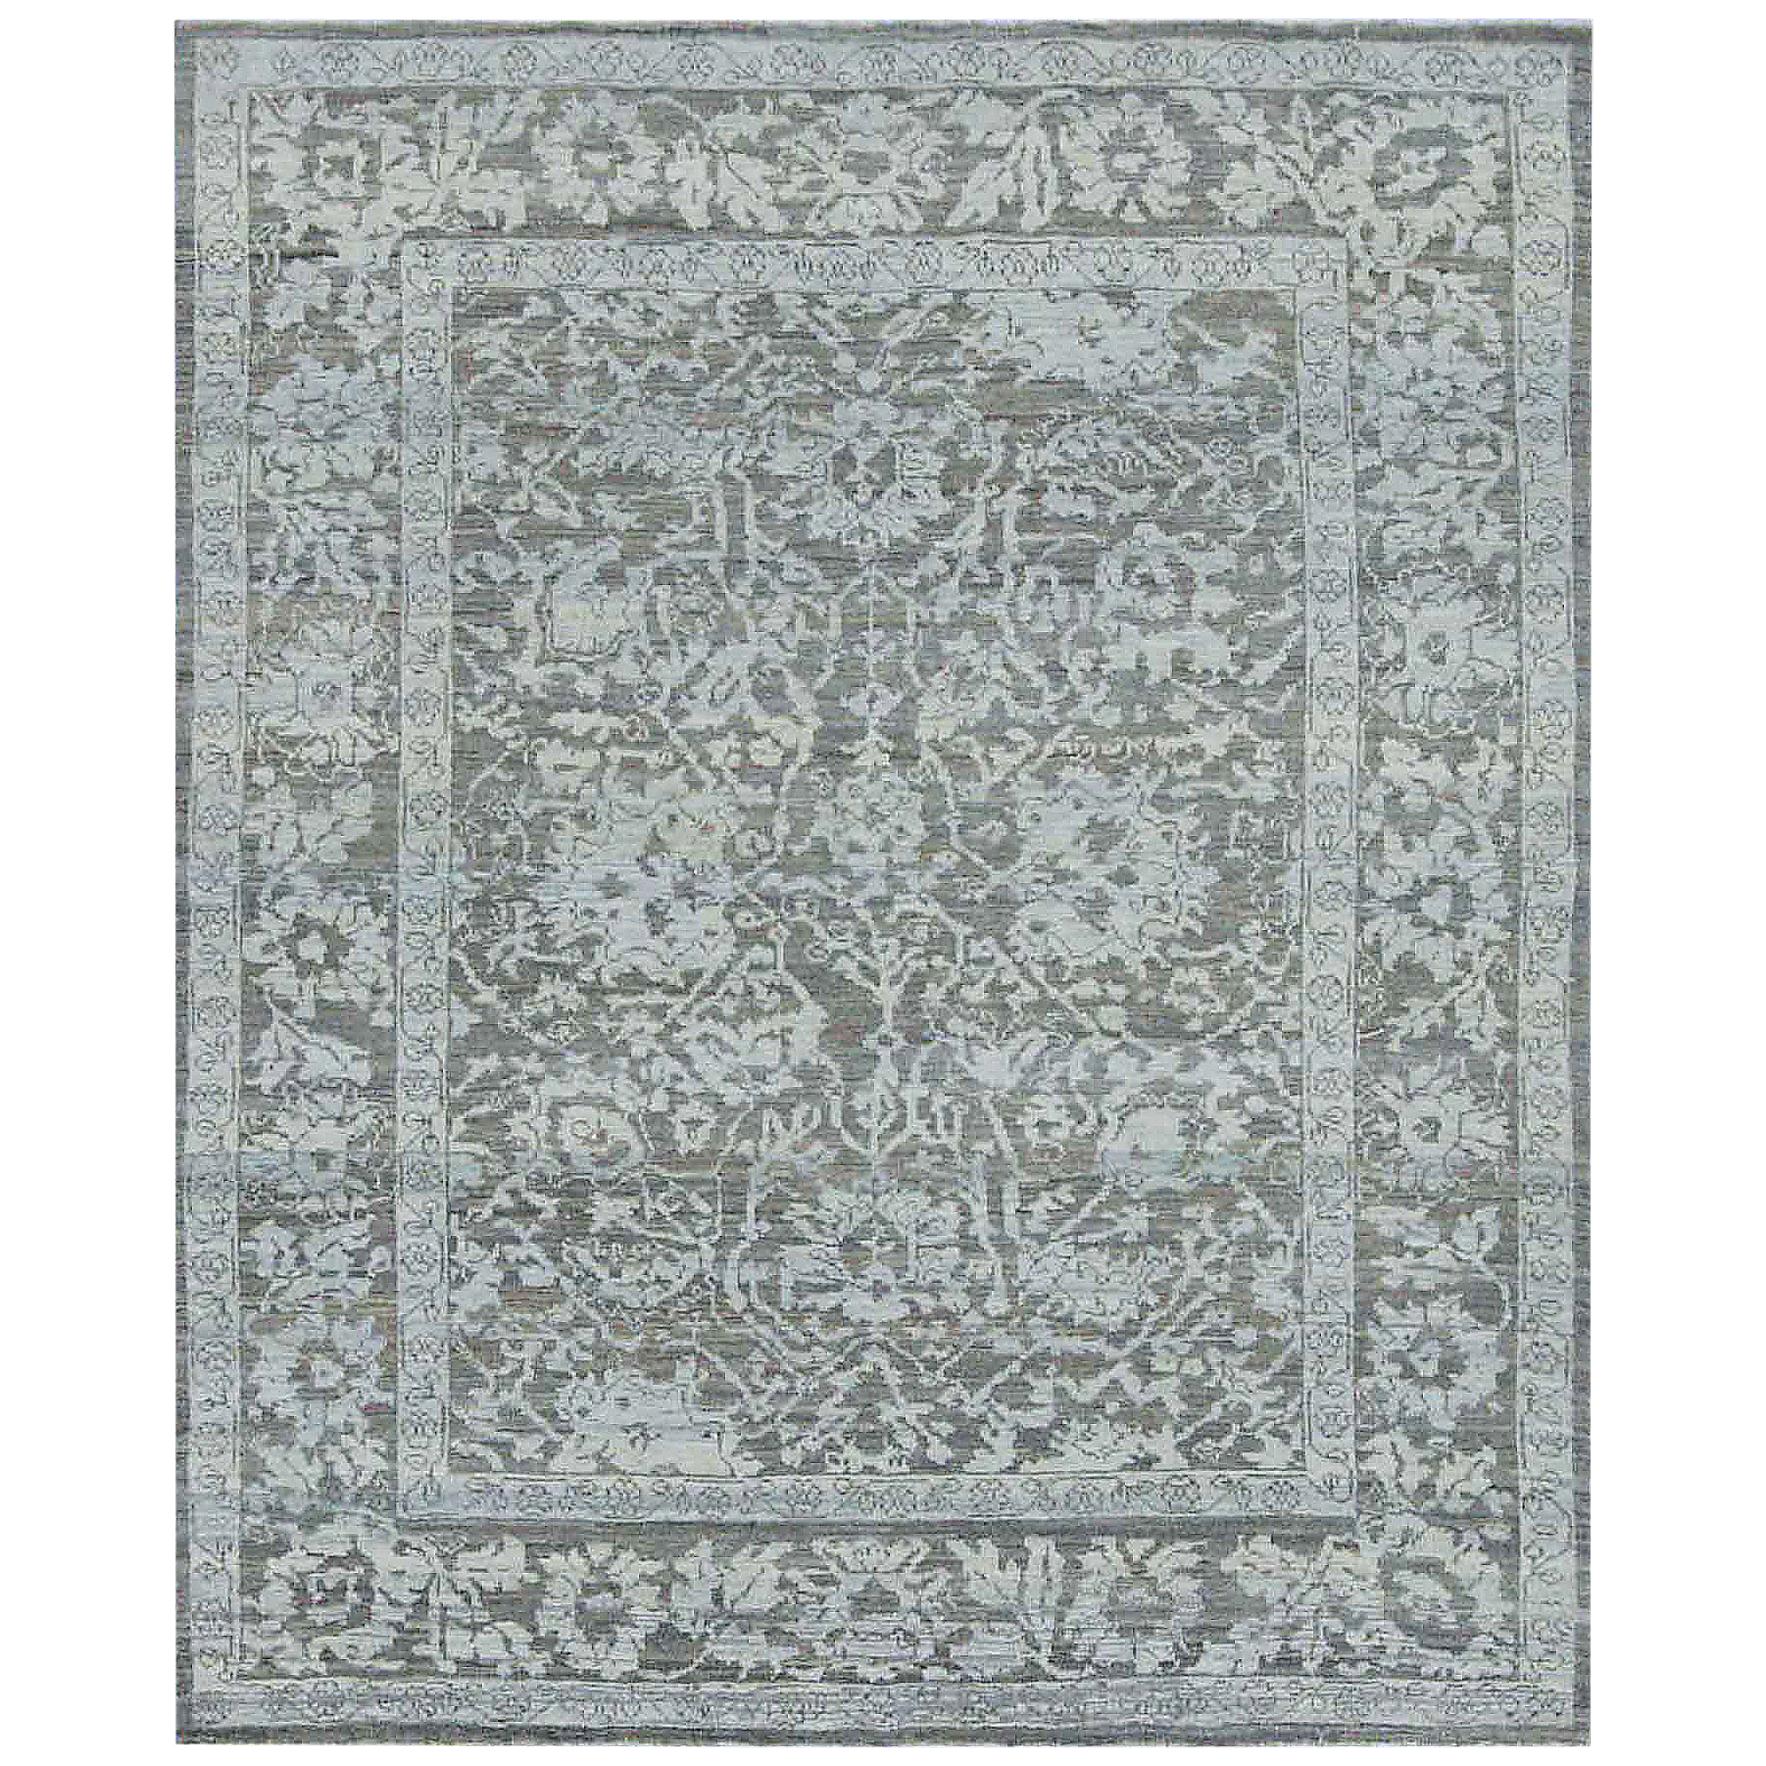 Modern Oushak Rug with Floral Motifs in Blue and White on Gray Field 